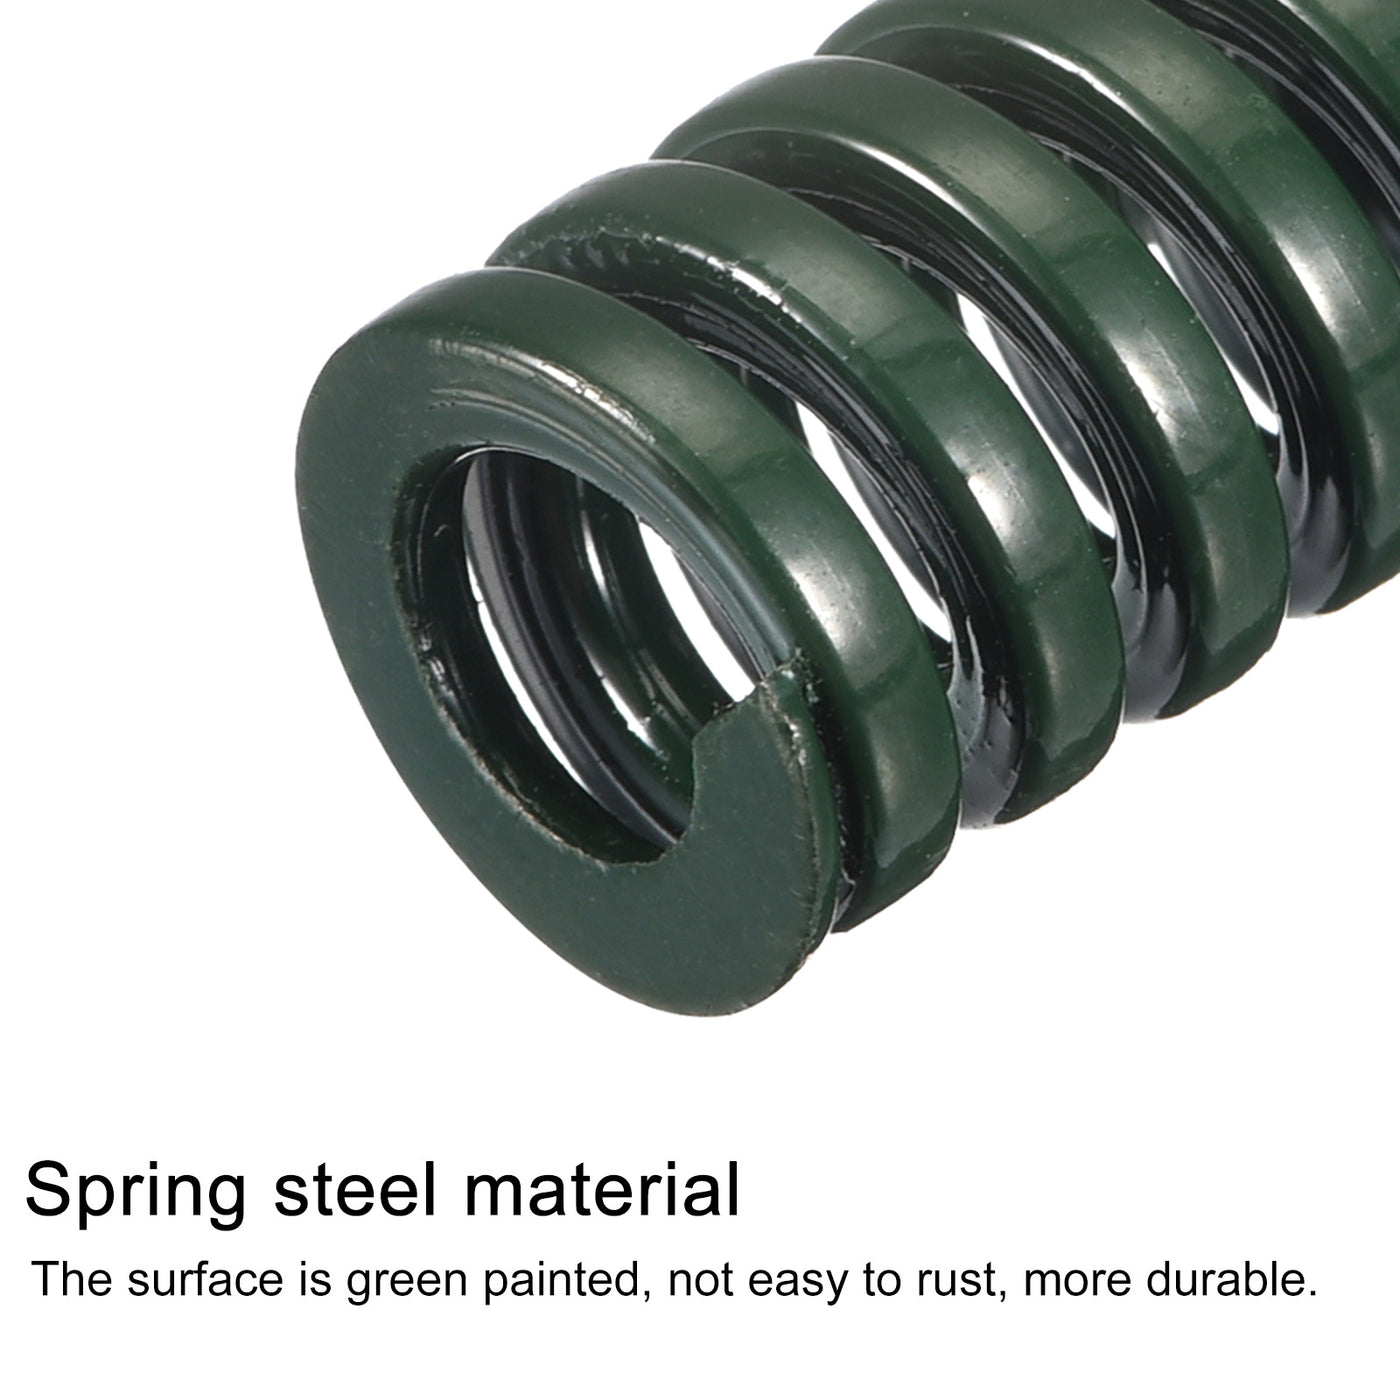 uxcell Uxcell 3D Printer Die Spring, 6pcs 14mm OD 70mm Long Spiral Stamping Compression Green